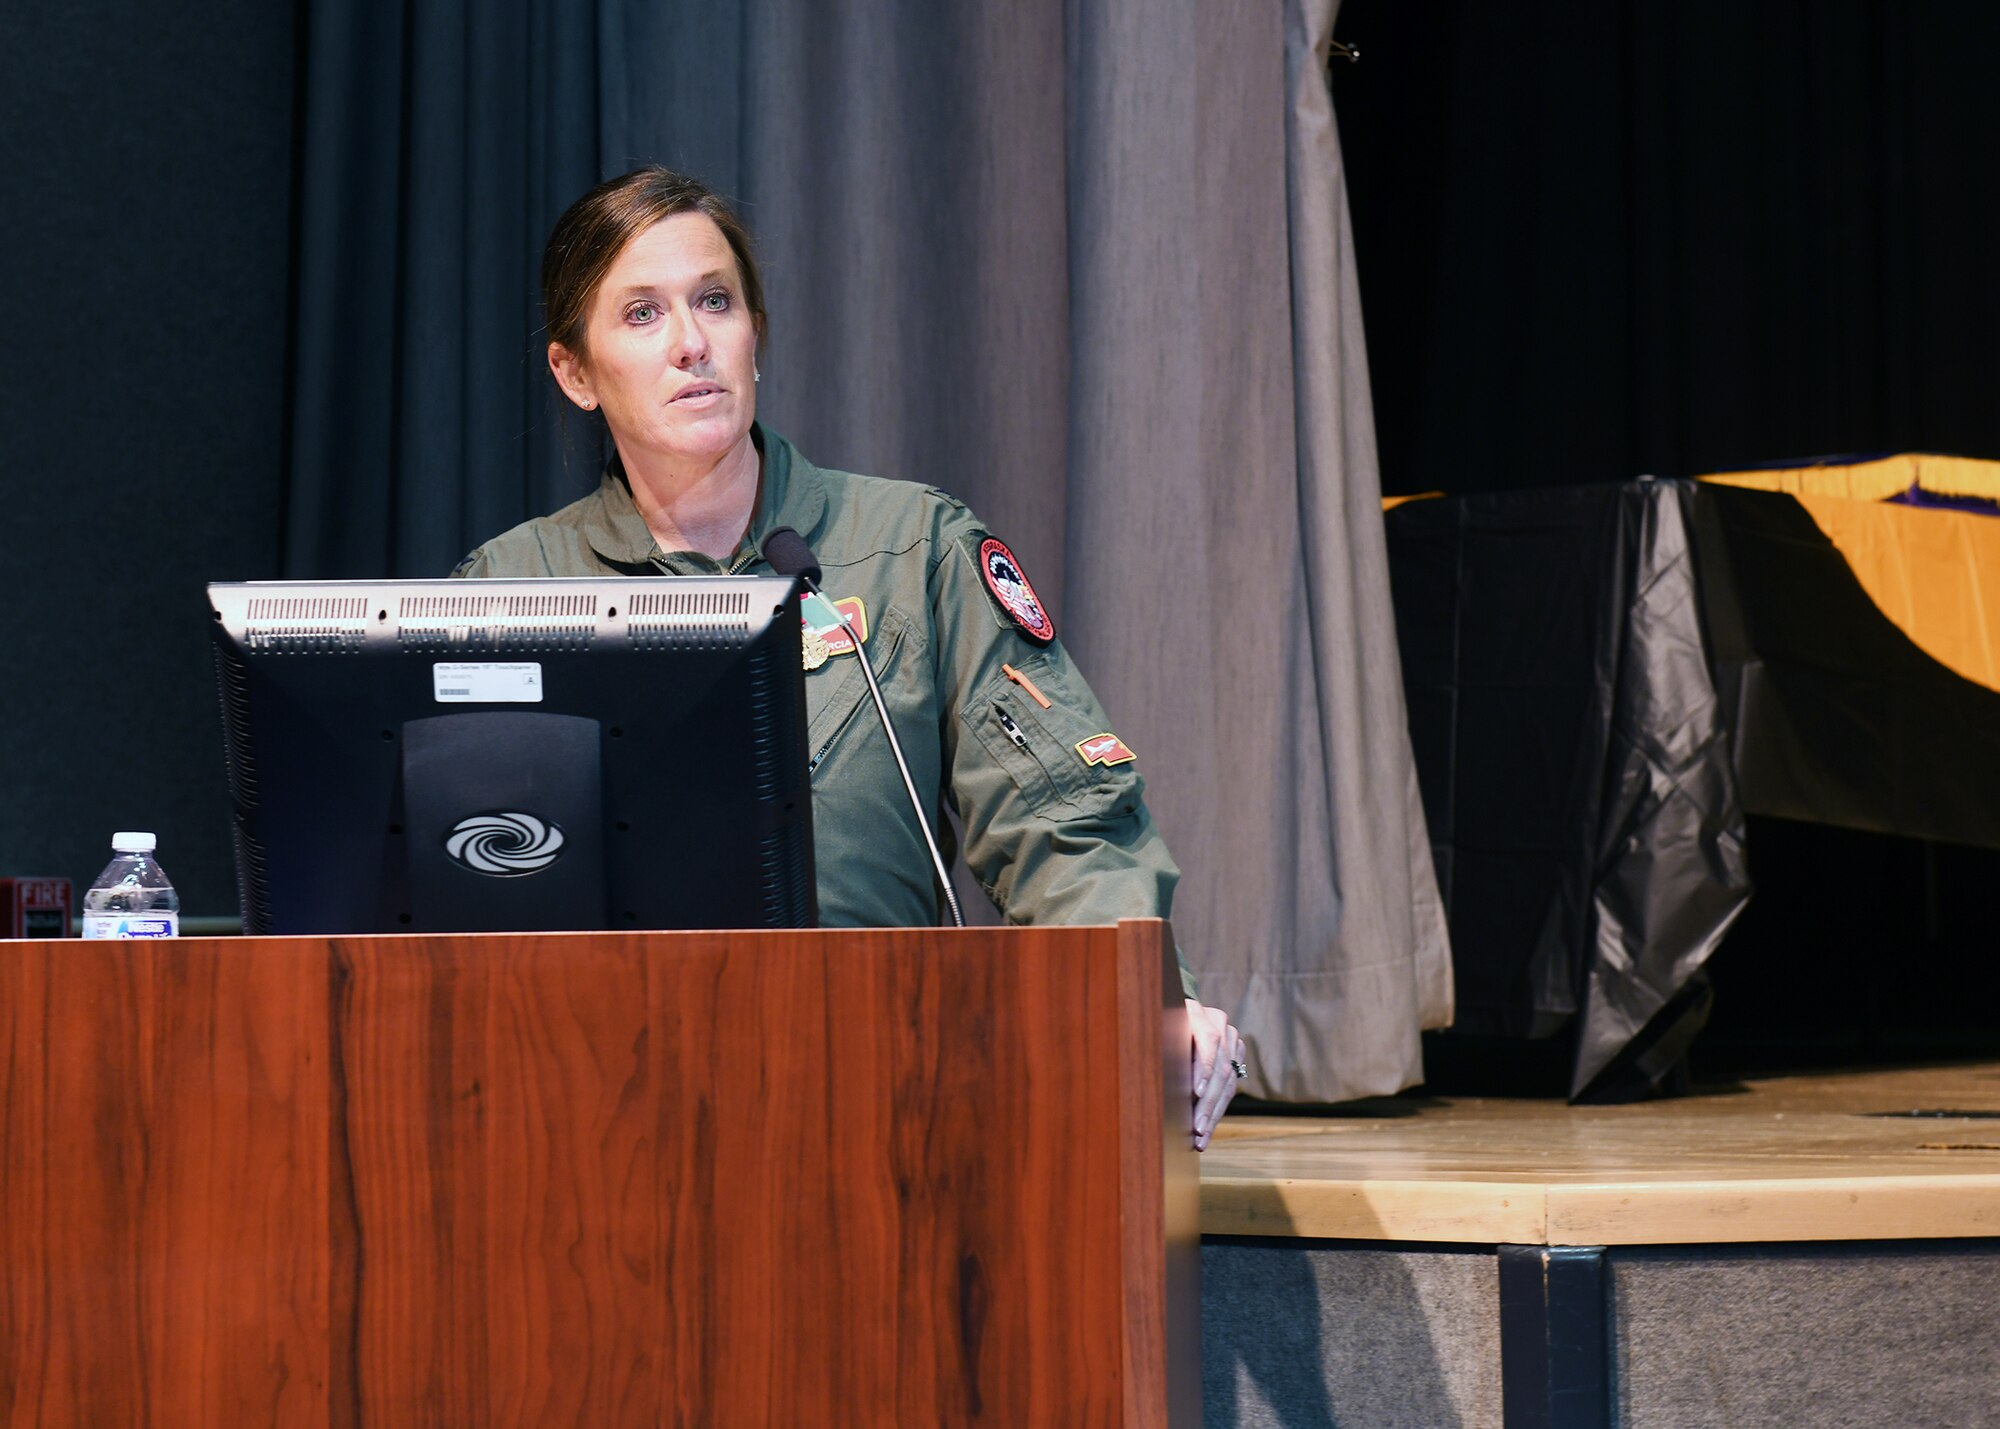 Woman military member gives her final remarks during assumption of command ceremony.